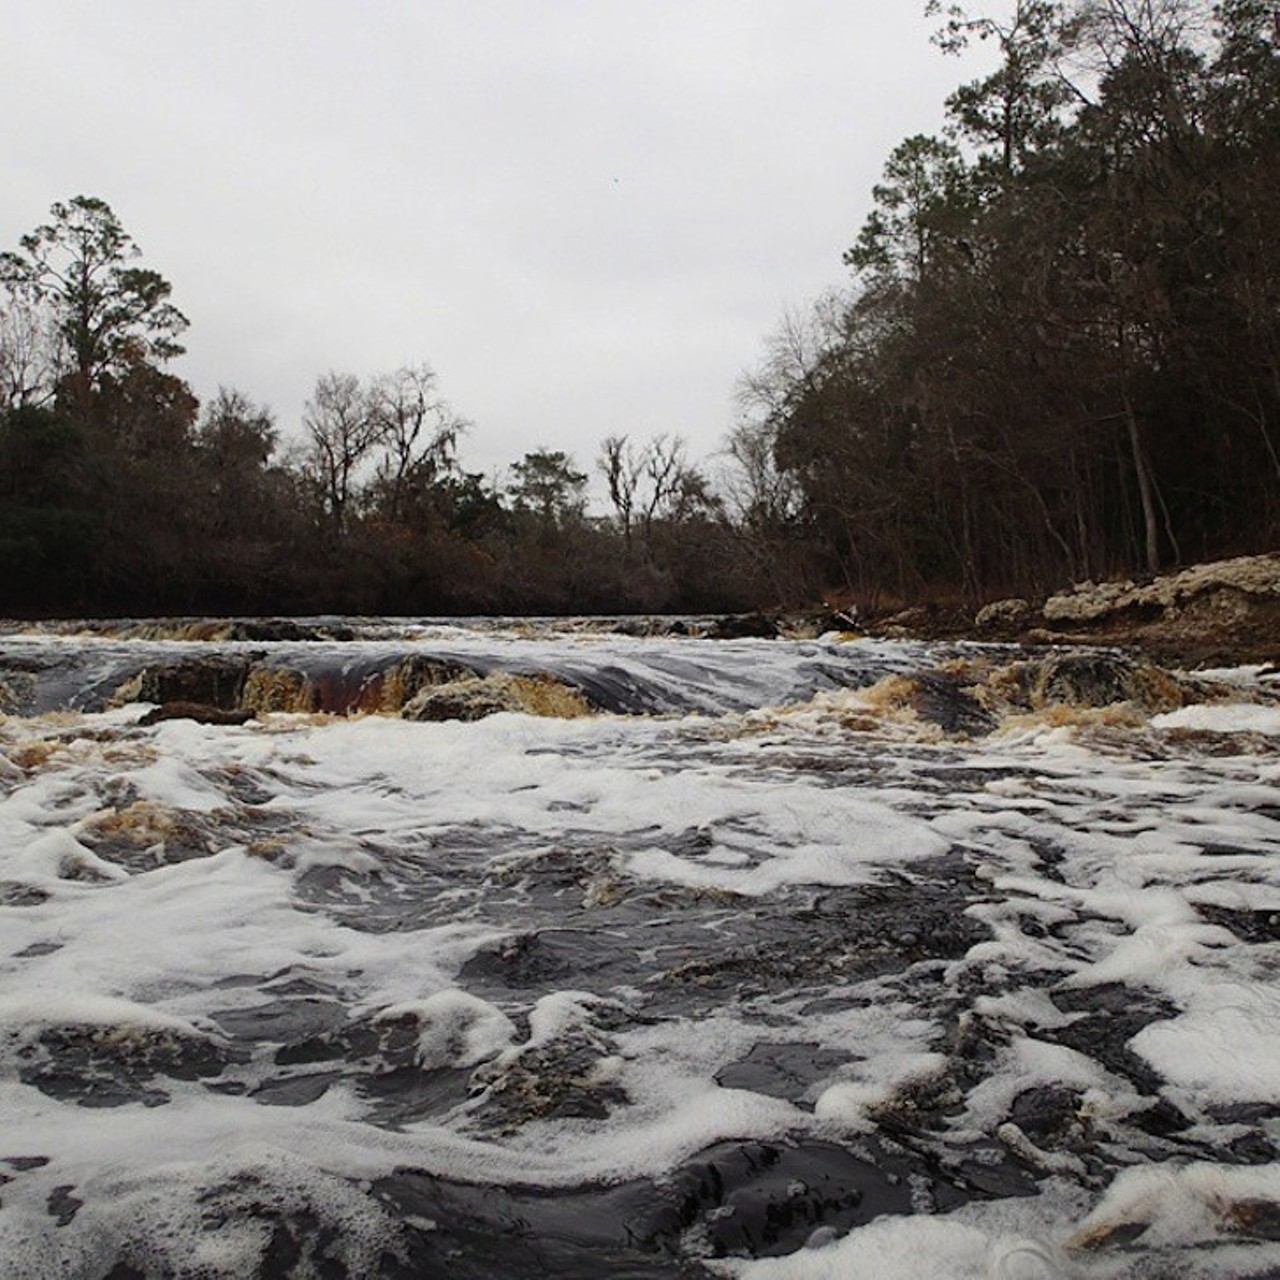 Big Shoals State Park
11330 S.E. County Road 135, White Springs, FL 32096 | (386) 397-4331 
Go for a hike on Big Shoals&#146; 1-mile Yellow Blaze Trail and reward yourself to a breathtaking set of rapid waters on the historic Suwannee River. If you&#146;re feeling particularly daring, give whitewater kayaking or canoeing a try at Big Shoals. 
Photo via lauraandtheriver/Instagram